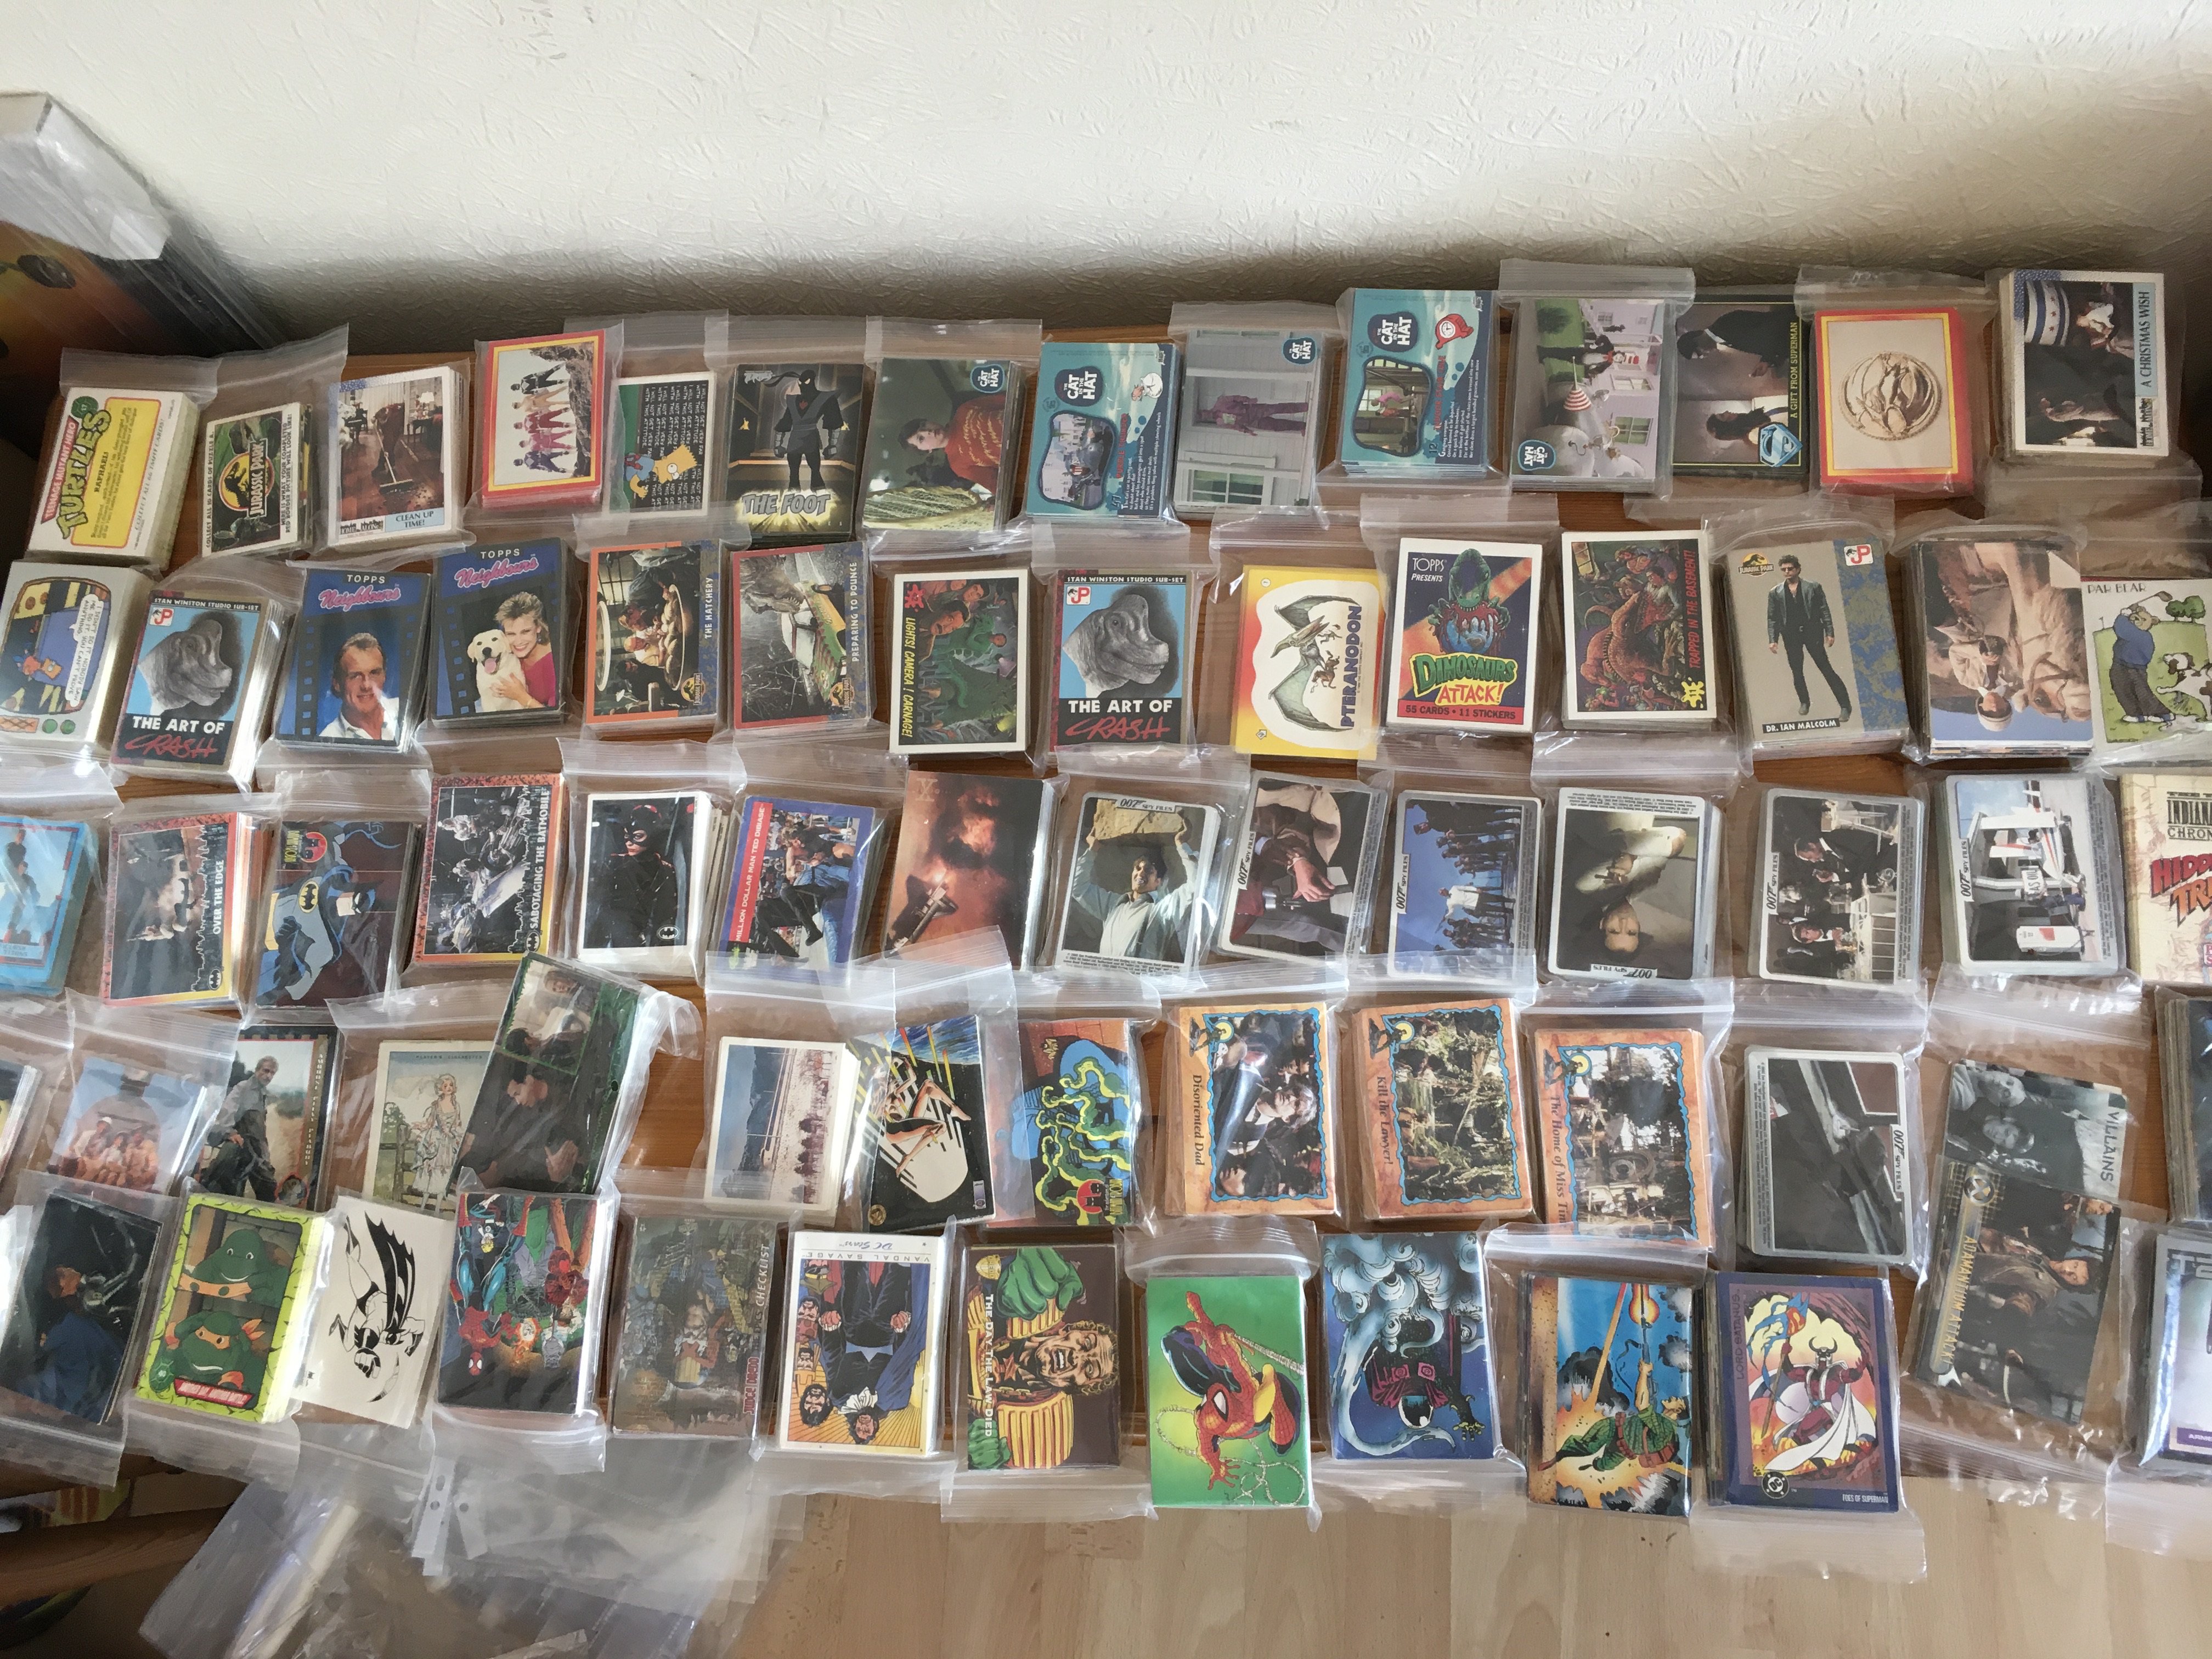 A box containing a collection of trading cards, in